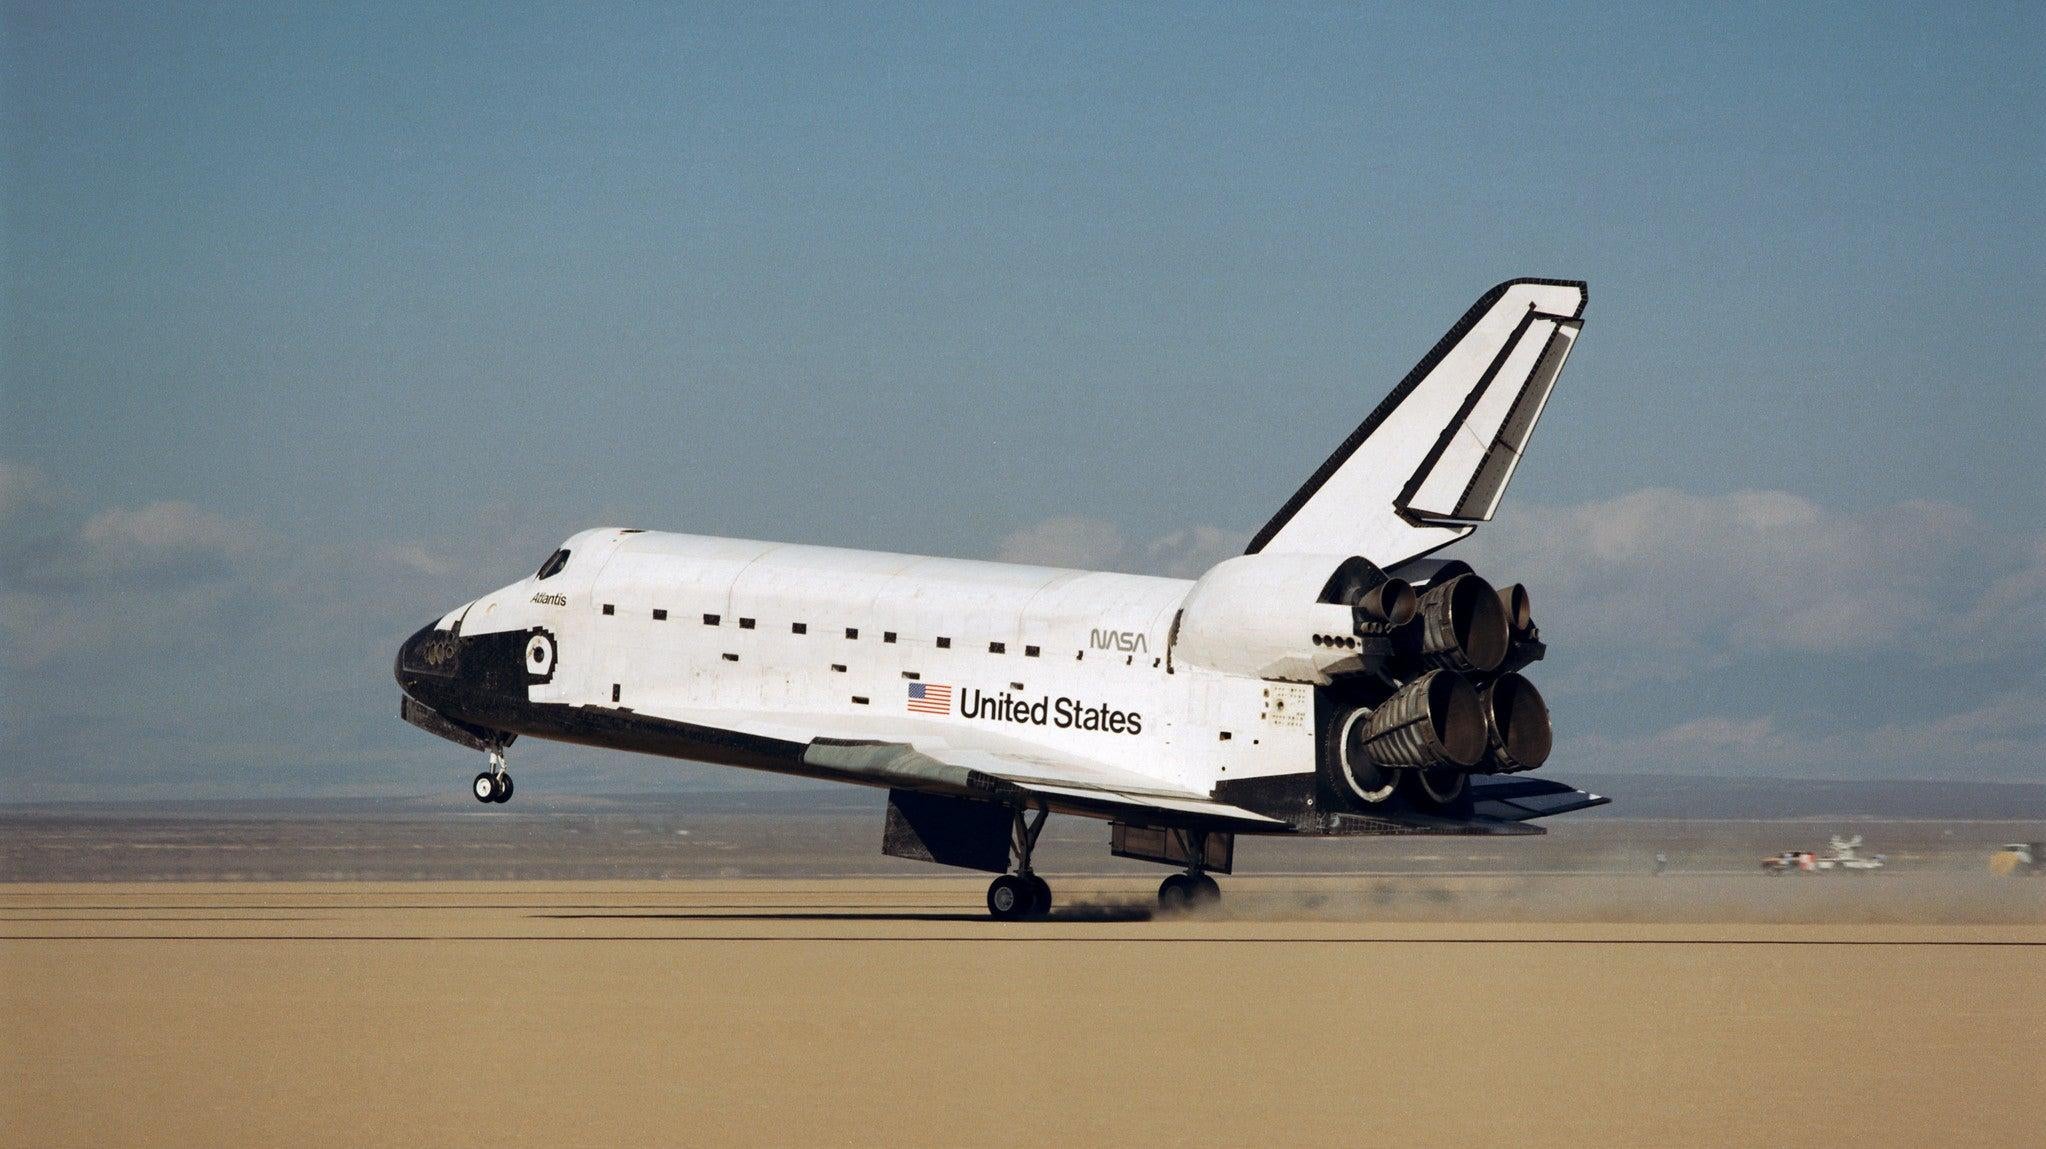 Space Shuttle Atlantis landing on October 23, 1989. The orbiters were equipped with three Space Shuttle Main Engines (SSMEs), now known as RS-25s.  (Photo: NASA)